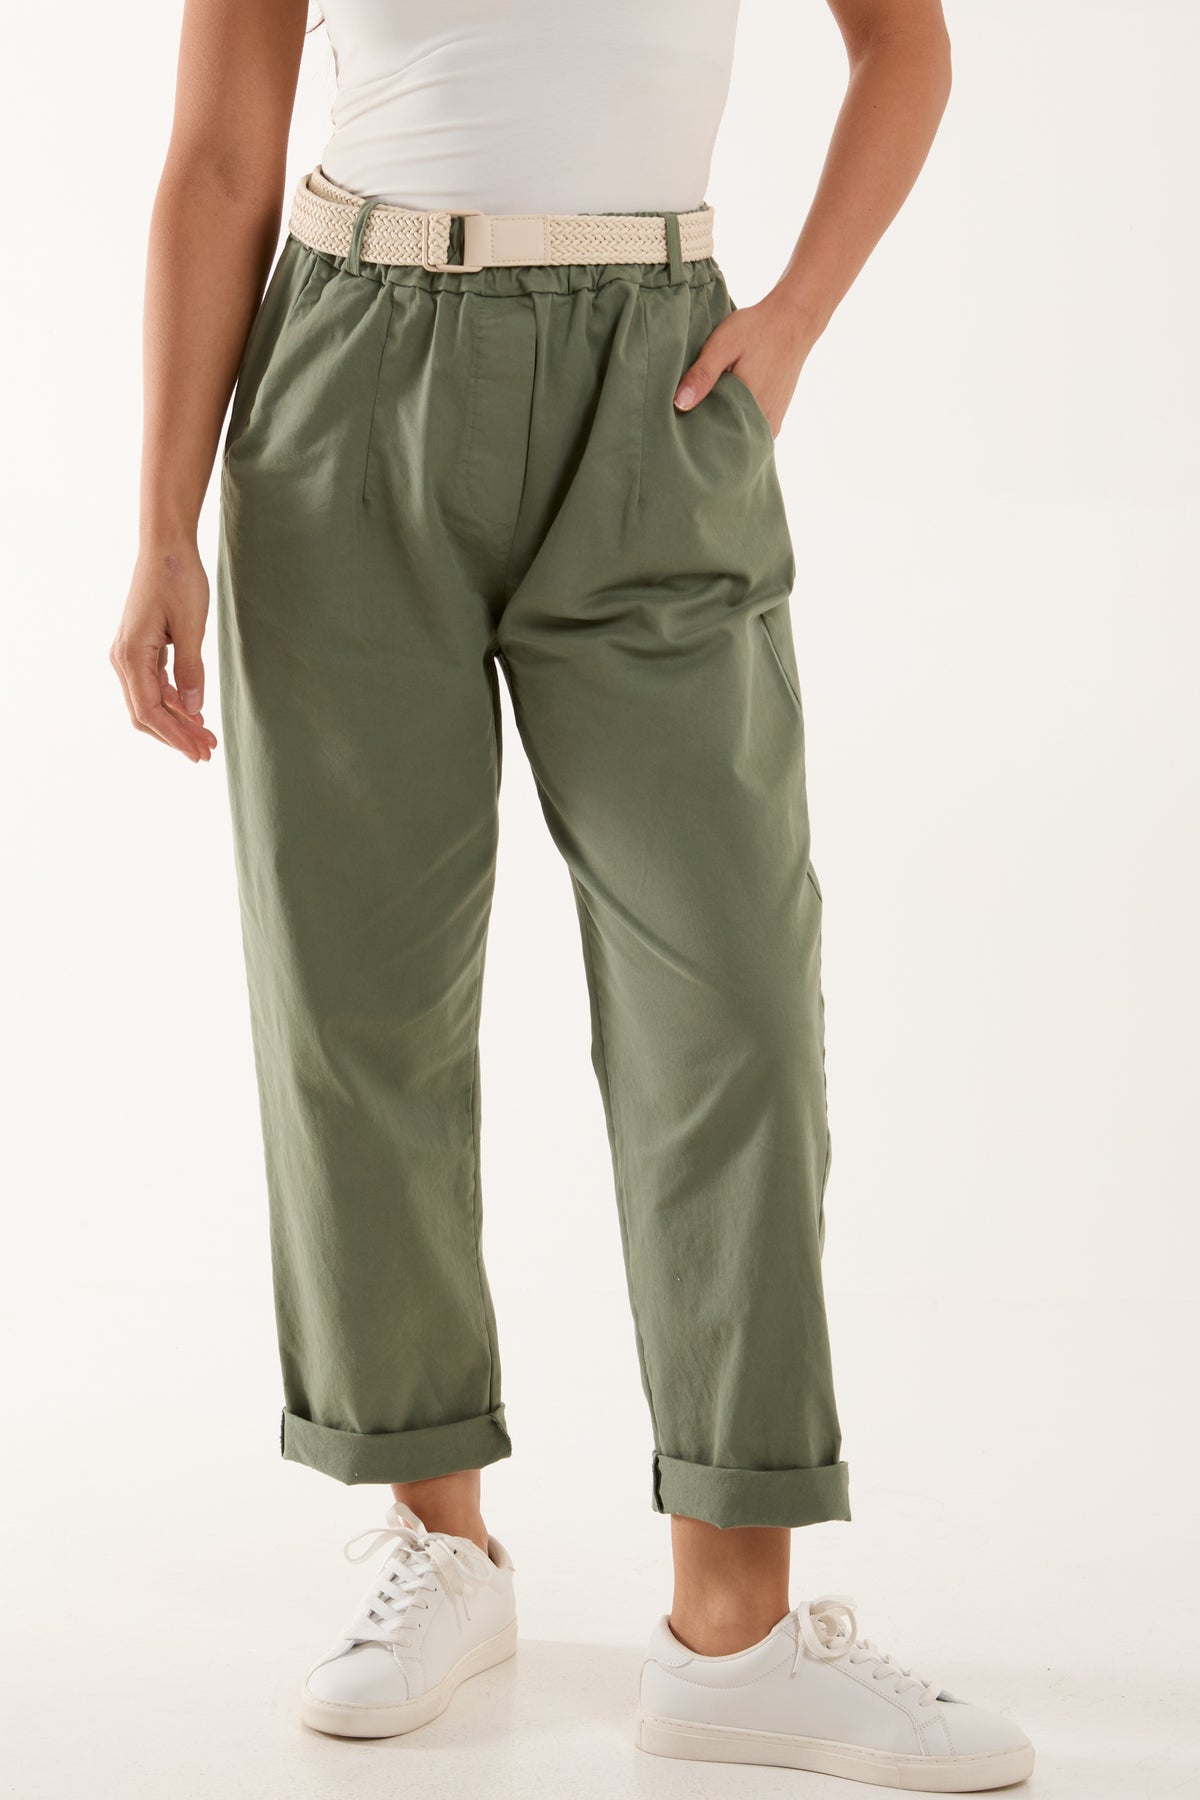 Belted High Waisted Cotton Drill Chinos